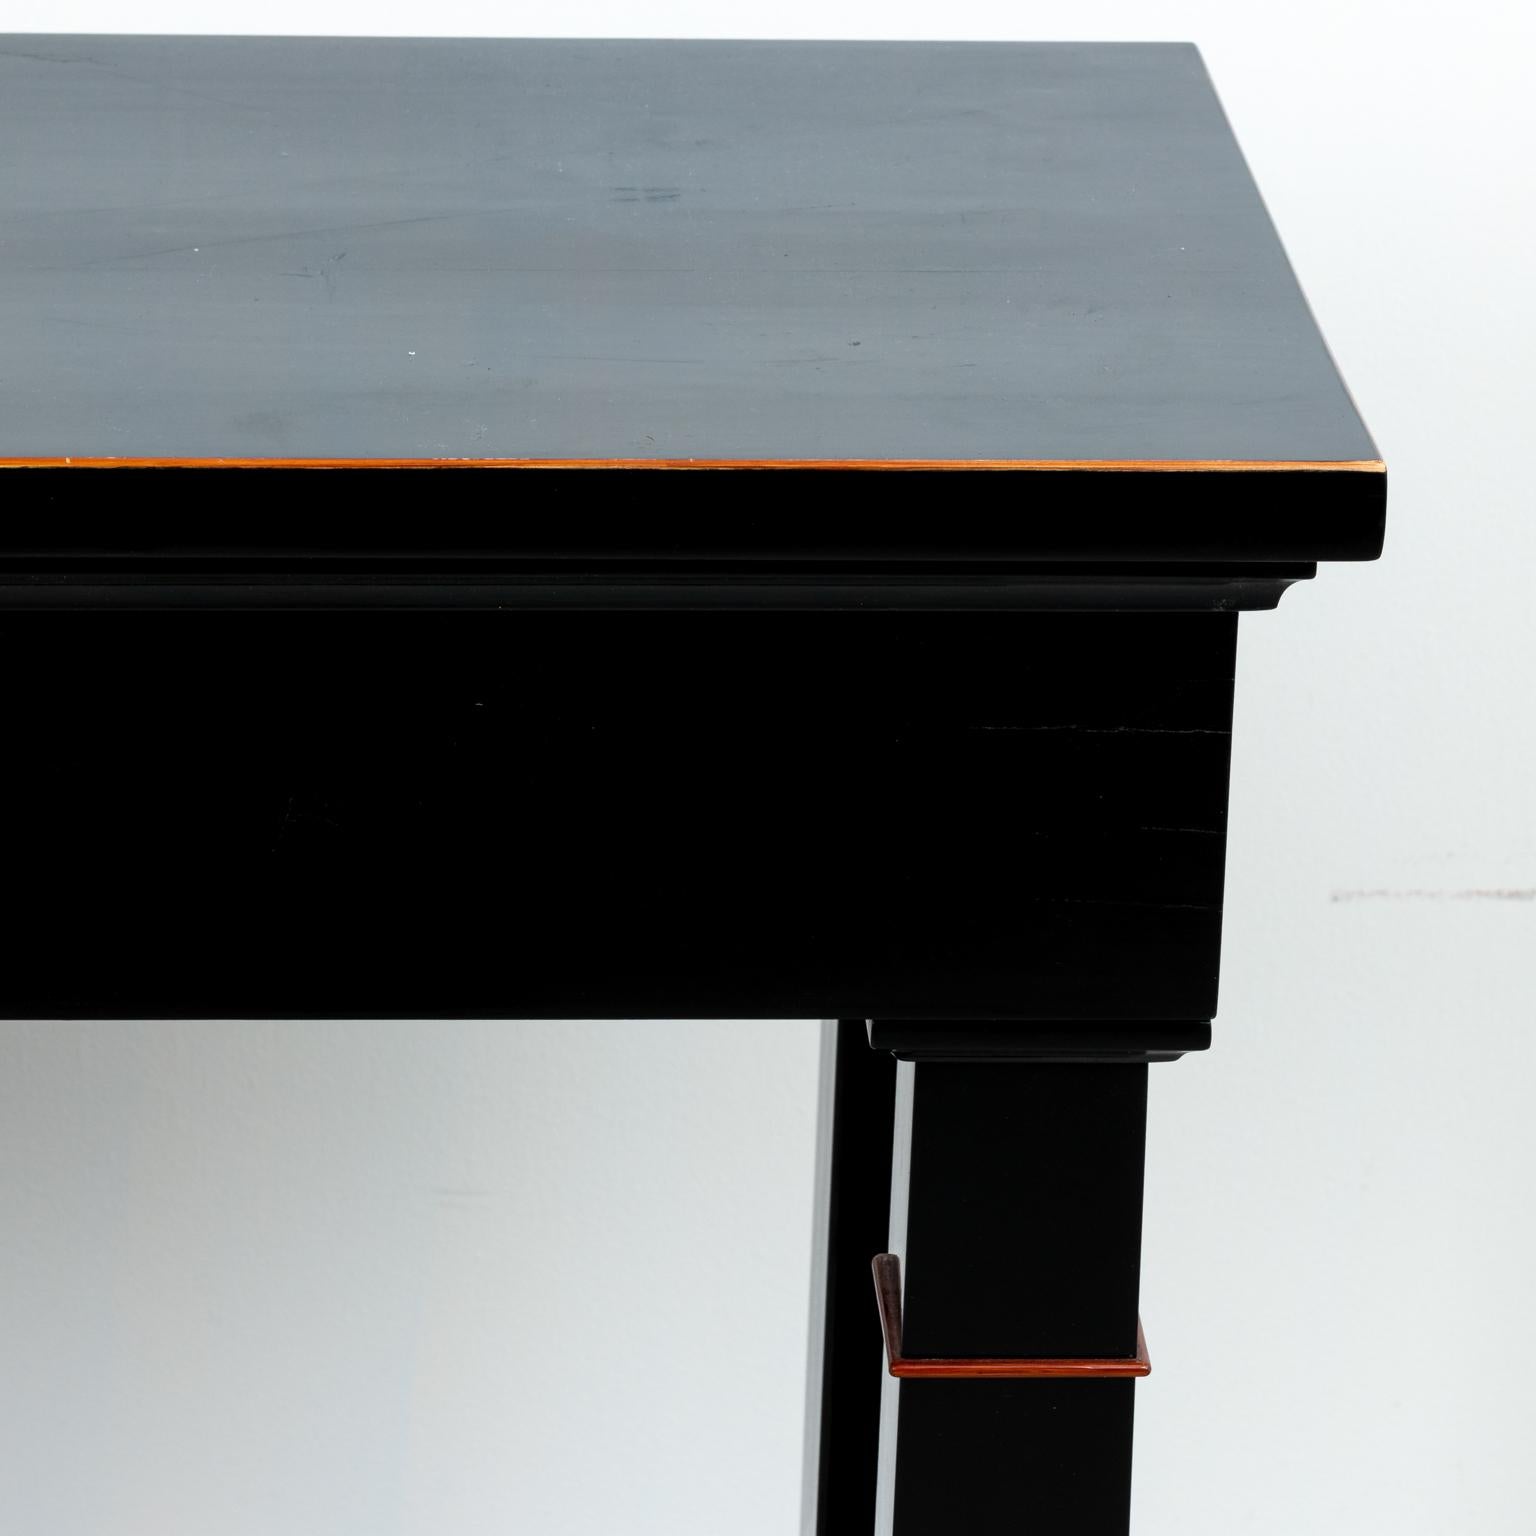 Pair of ebony wood console tables with bottom shelf in a polished finish. Please note of wear consistent with age including minor finish loss.